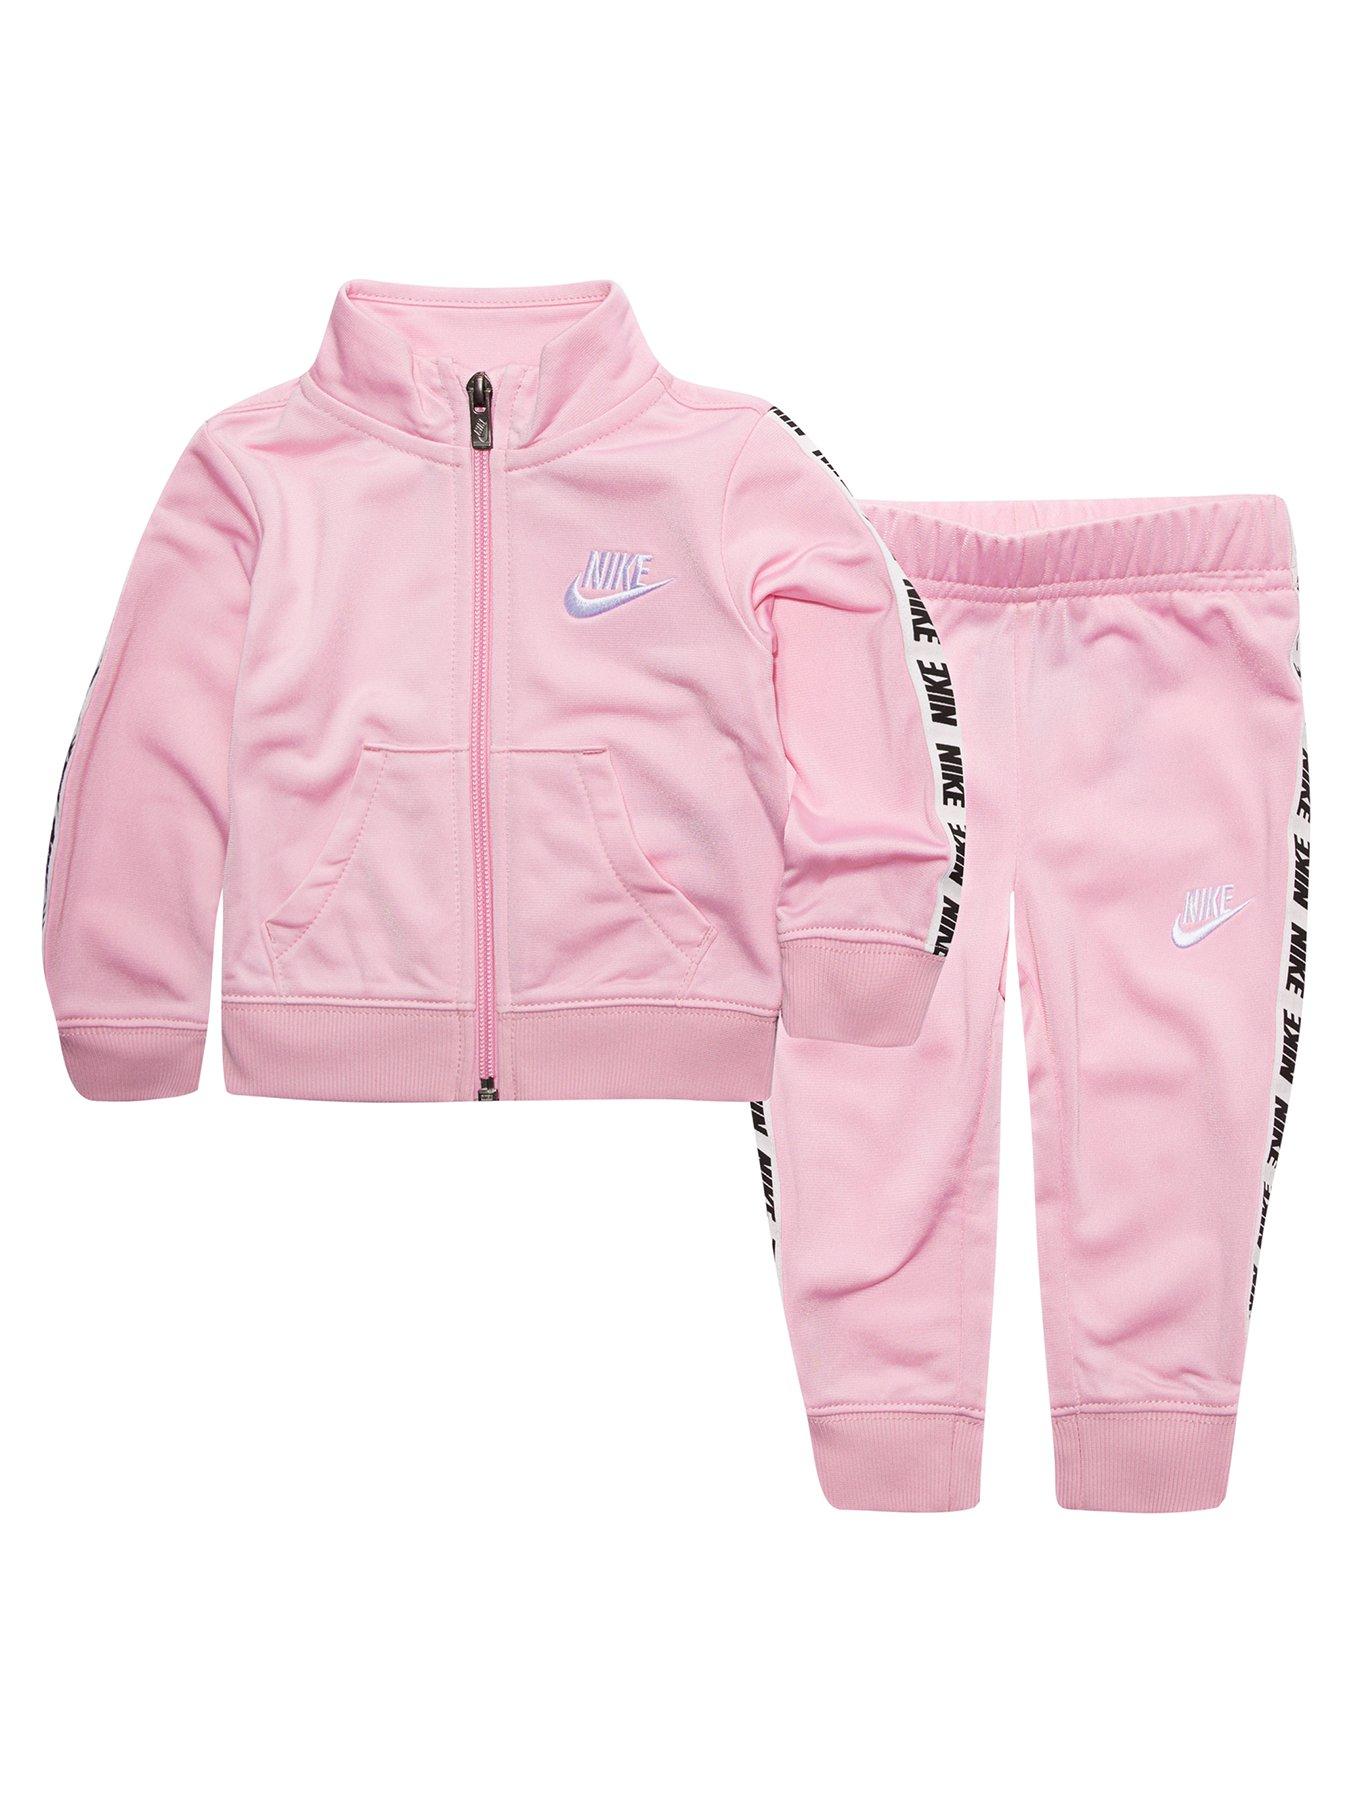 baby girl nike tracksuits 6 9 months 